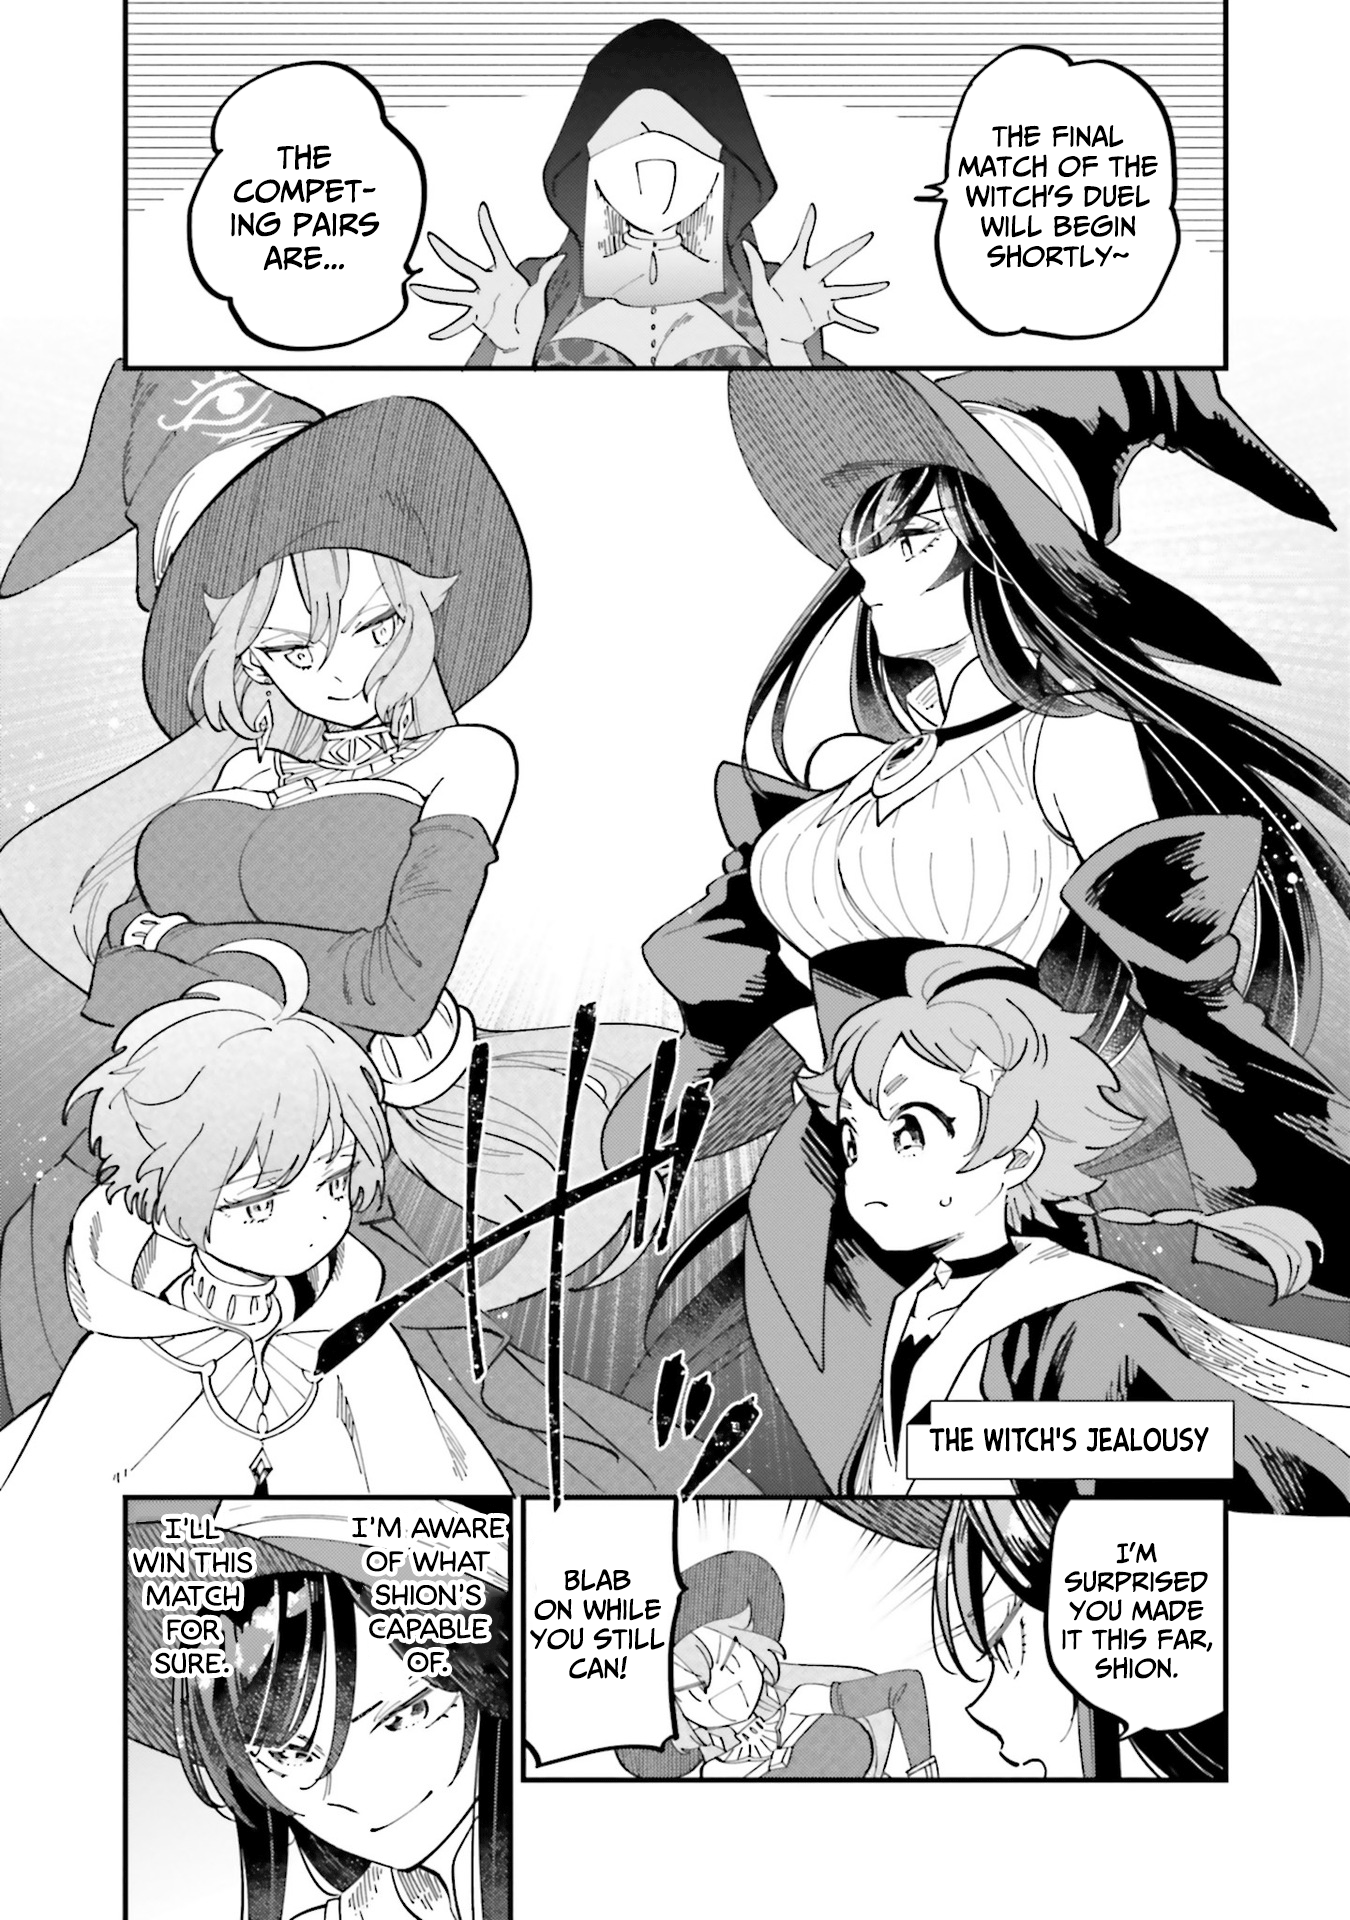 The Witch's Marriage - Page 1